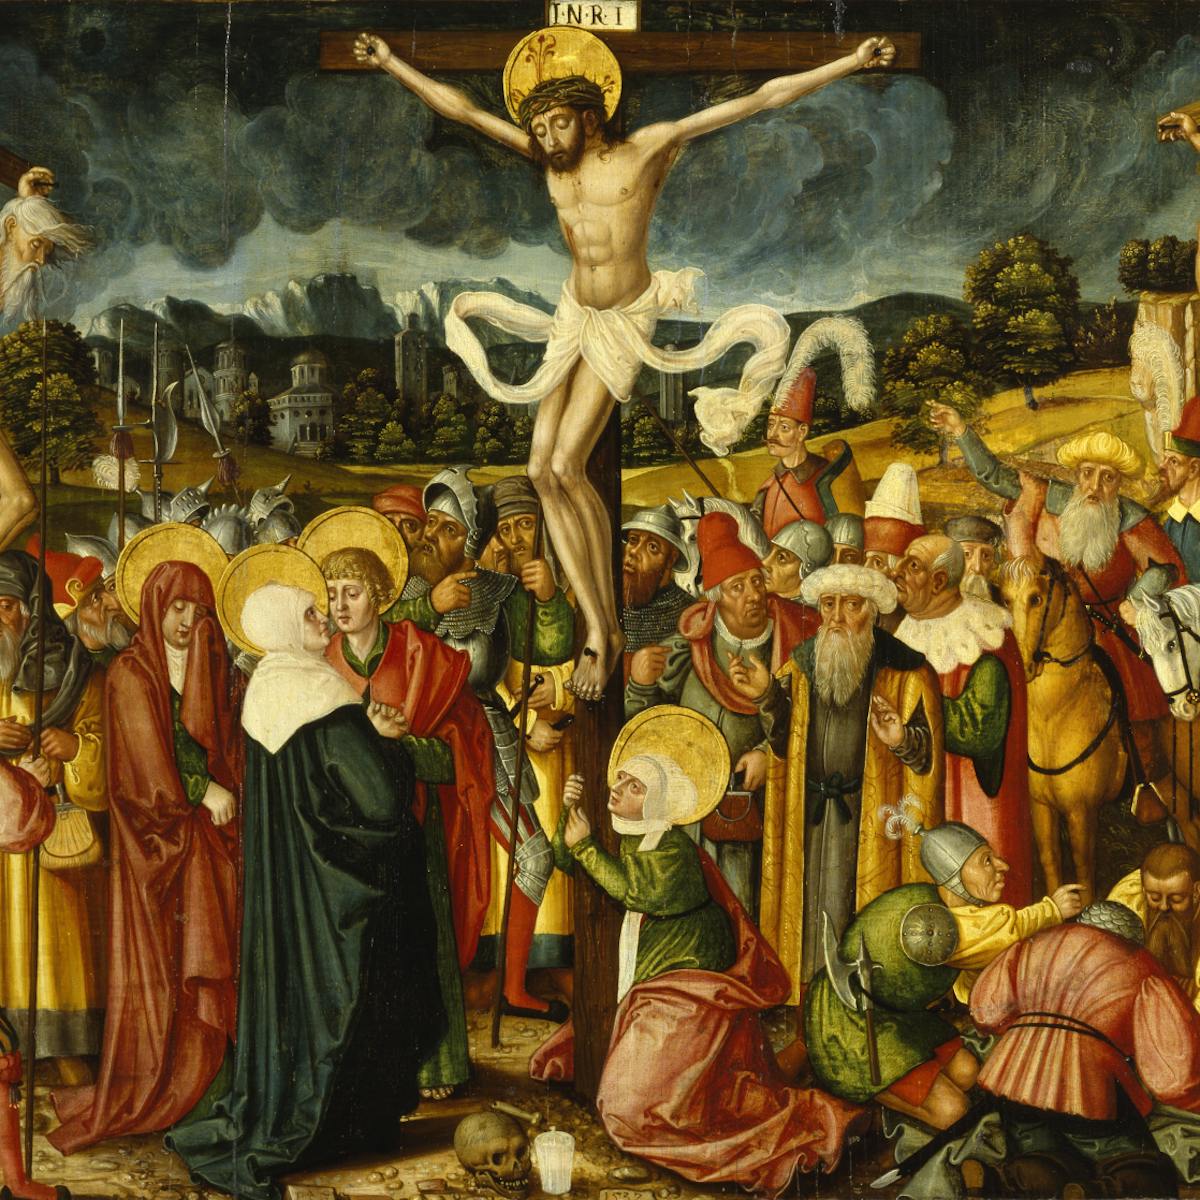 Was Jesus really nailed to the cross?